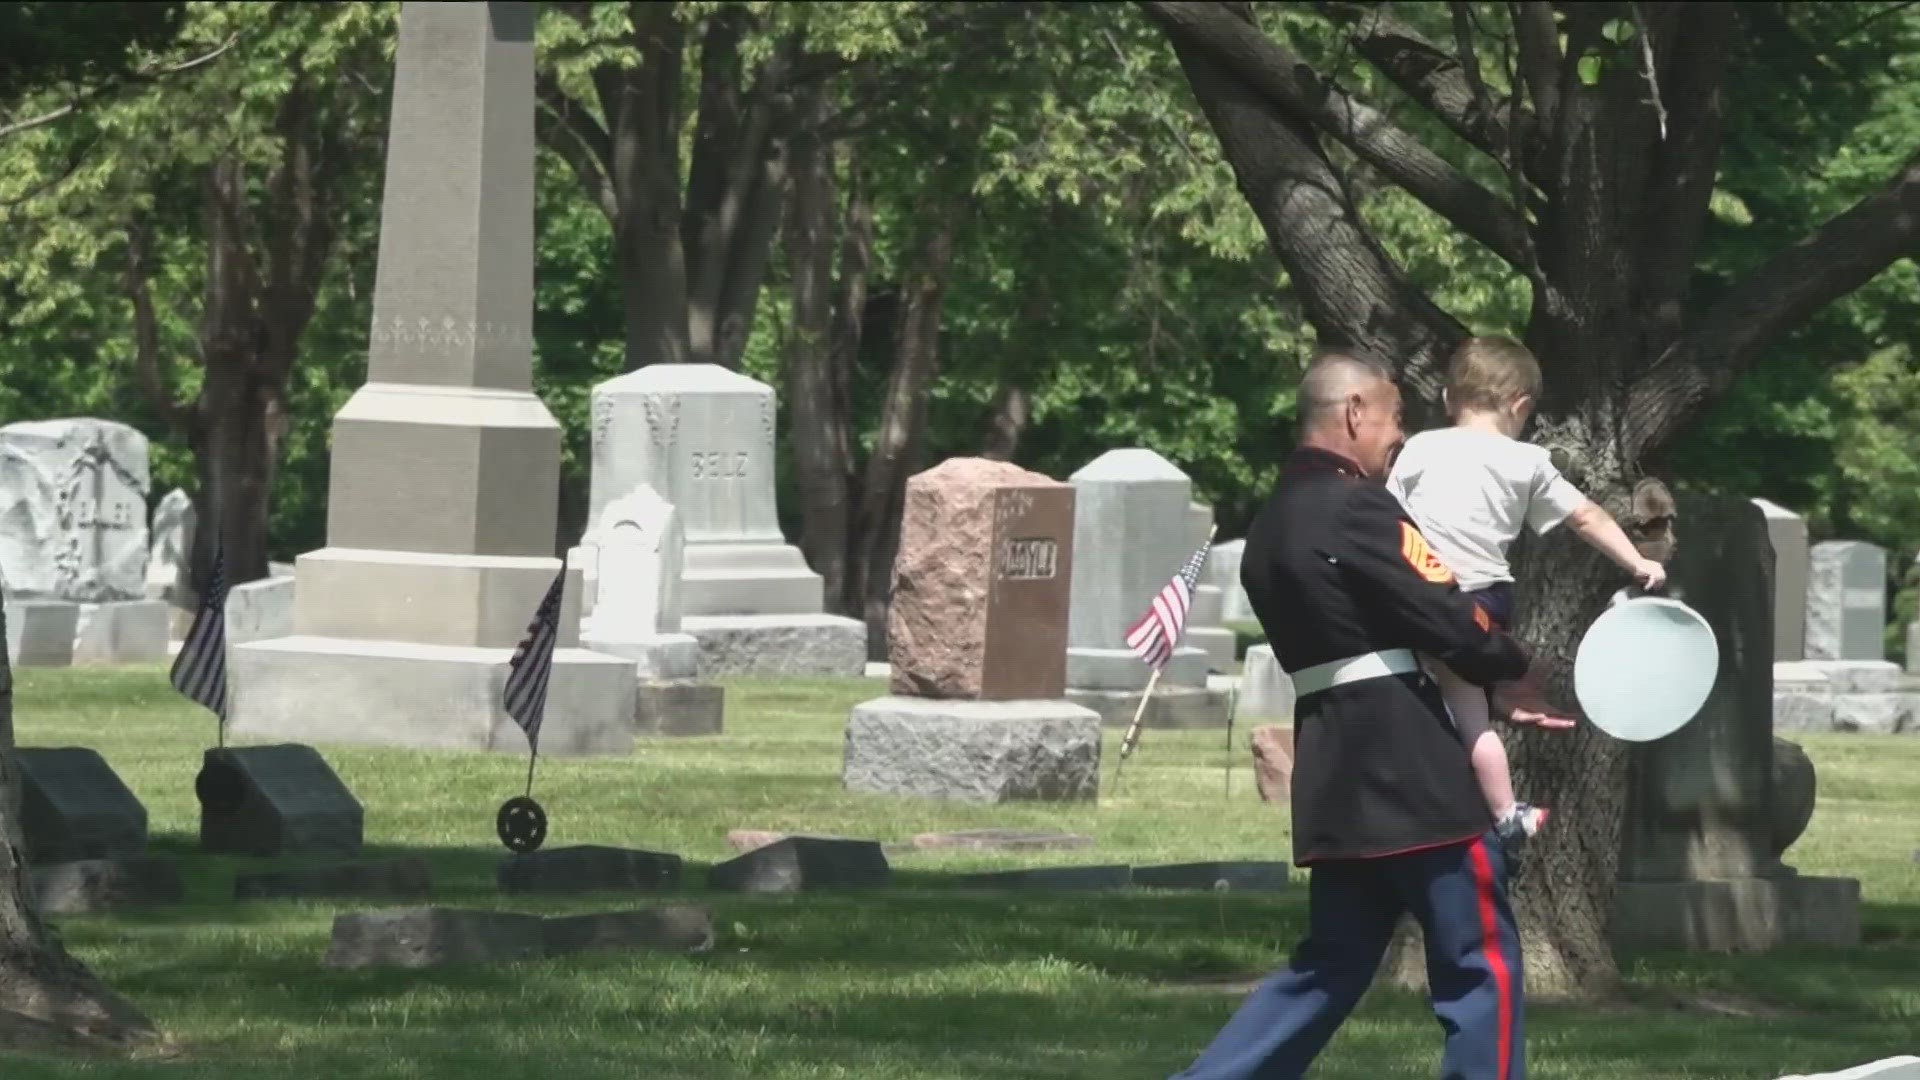 Michael Sandlin takes us to Perrysburg where the Memorial Day ceremony leaves an impression on everyone involved.